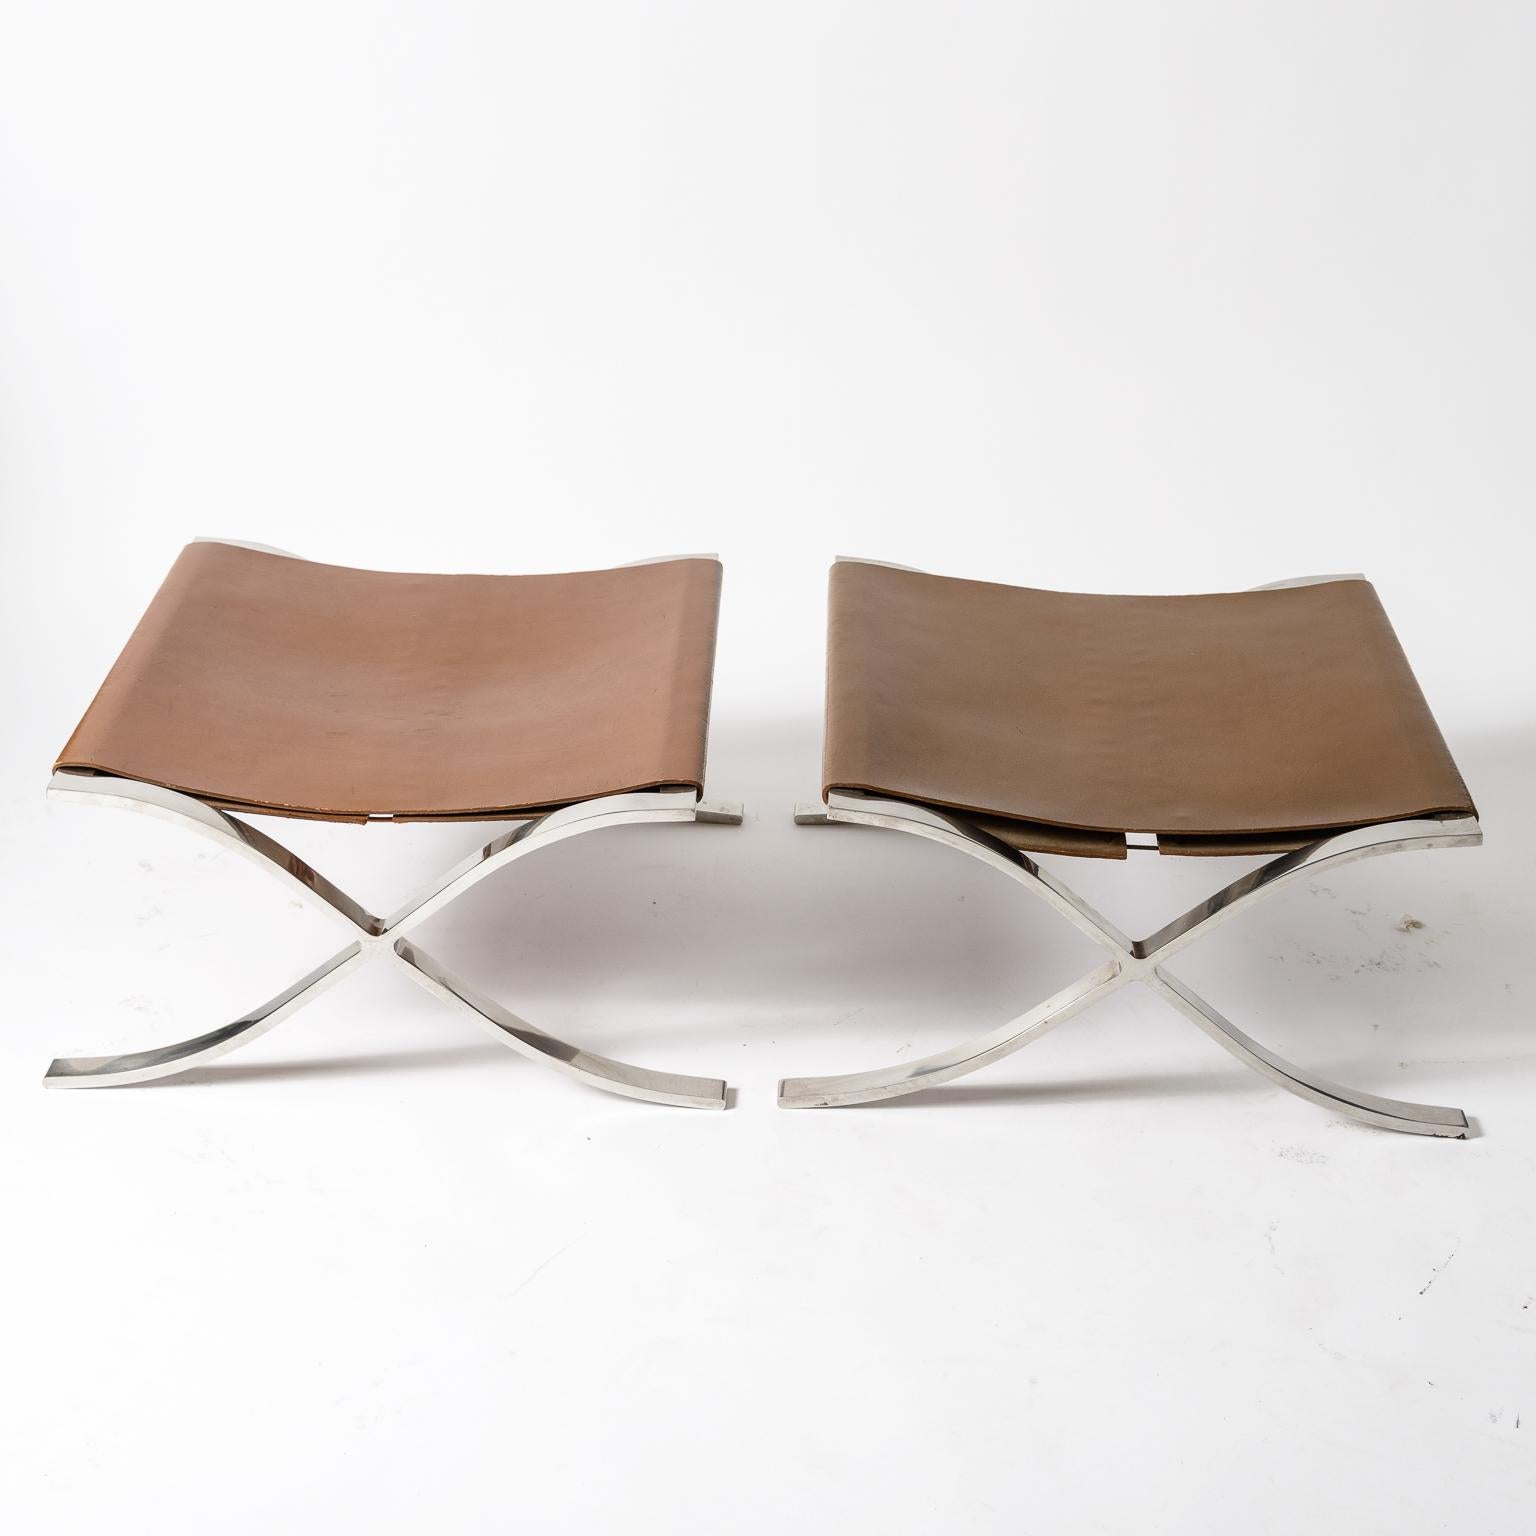 A pair of early Mies Van Der Rohe Sling Ottomans.
Original leather slings and lacing
Polished Stainless Steel Frames
Ottomans are slightly different in color
Knoll Labels